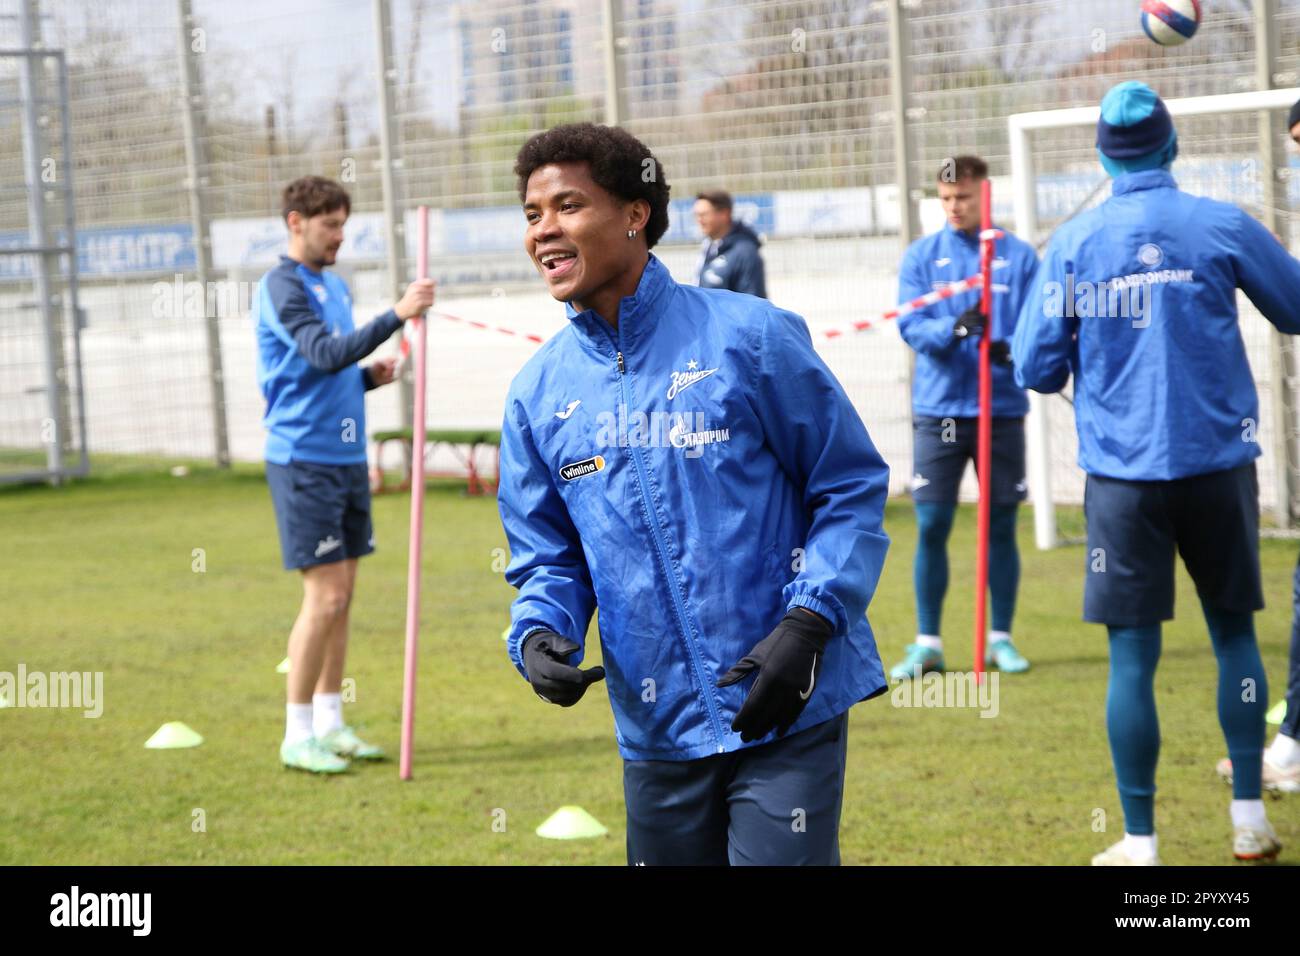 Saint Petersburg, Russia. 05th May, 2023. Wilmar Enrique Barrios Teran, known as Wilmar Barrios of Zenit Football Club warms up during the training session at Gazprom Training Centre before the match of the 26th round of the Russian Premier League, Zenit Saint Petersburg - Spartak Moscow. (Photo by Maksim Konstantinov/SOPA Images/Sipa USA) Credit: Sipa USA/Alamy Live News Stock Photo